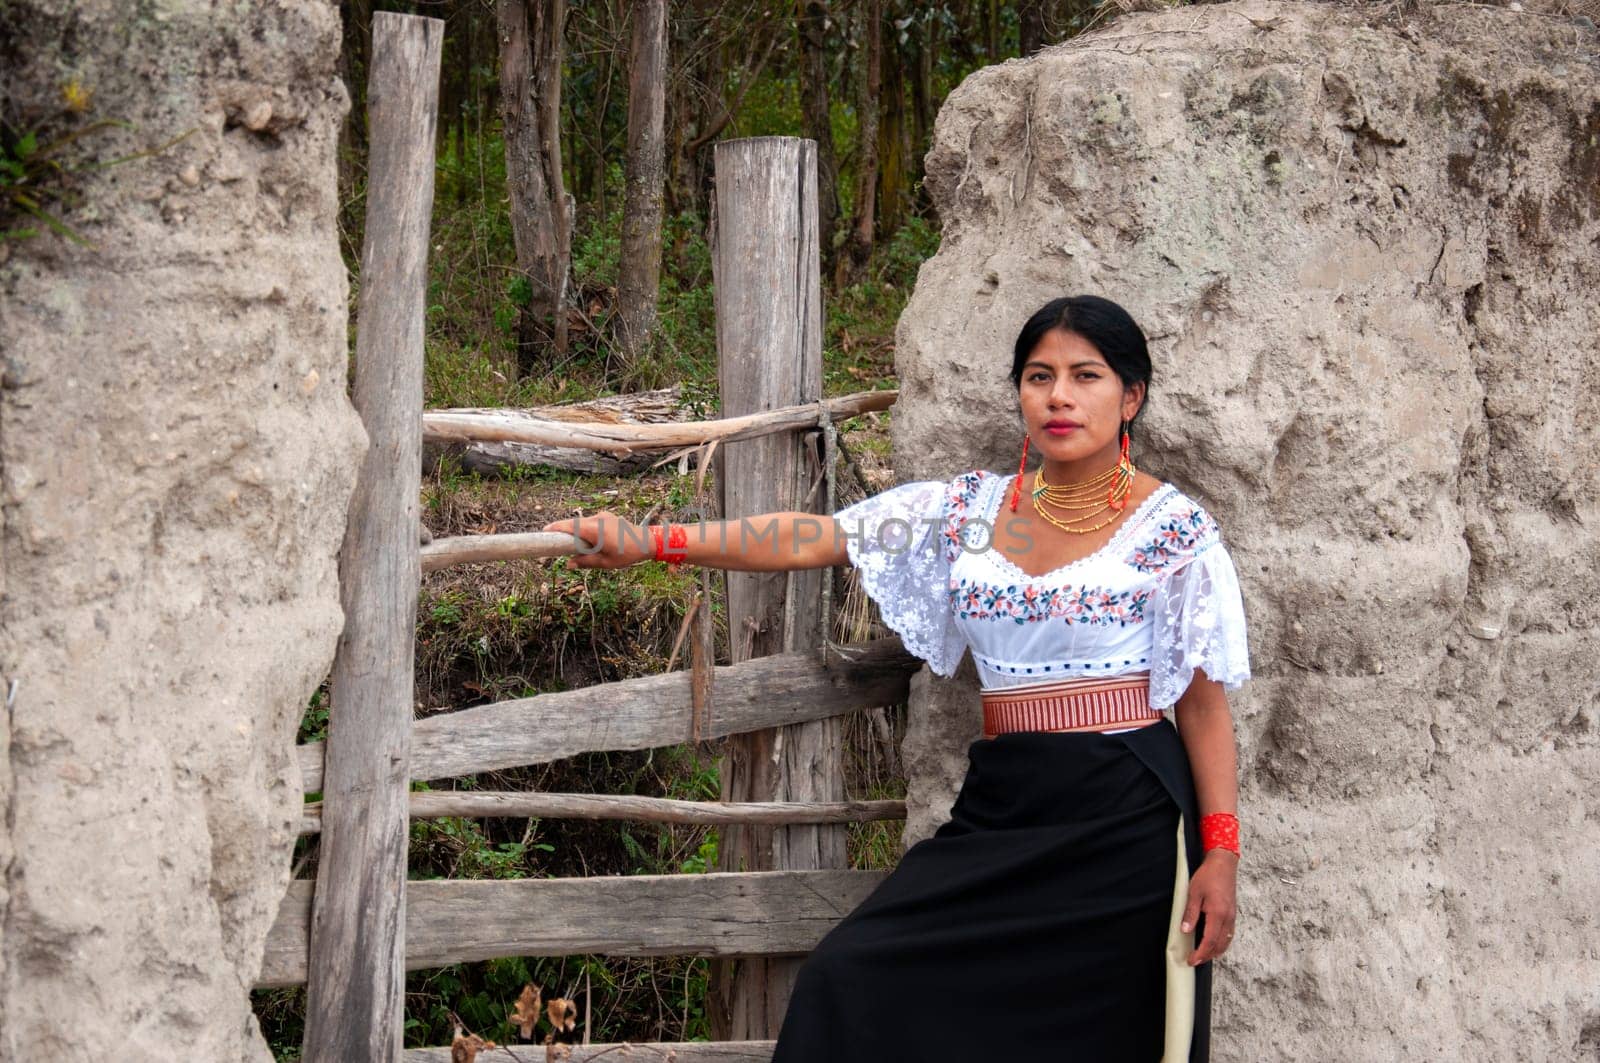 indigenous woman at the door of her house wearing traditional dress of her ecuadorian culture. High quality photo